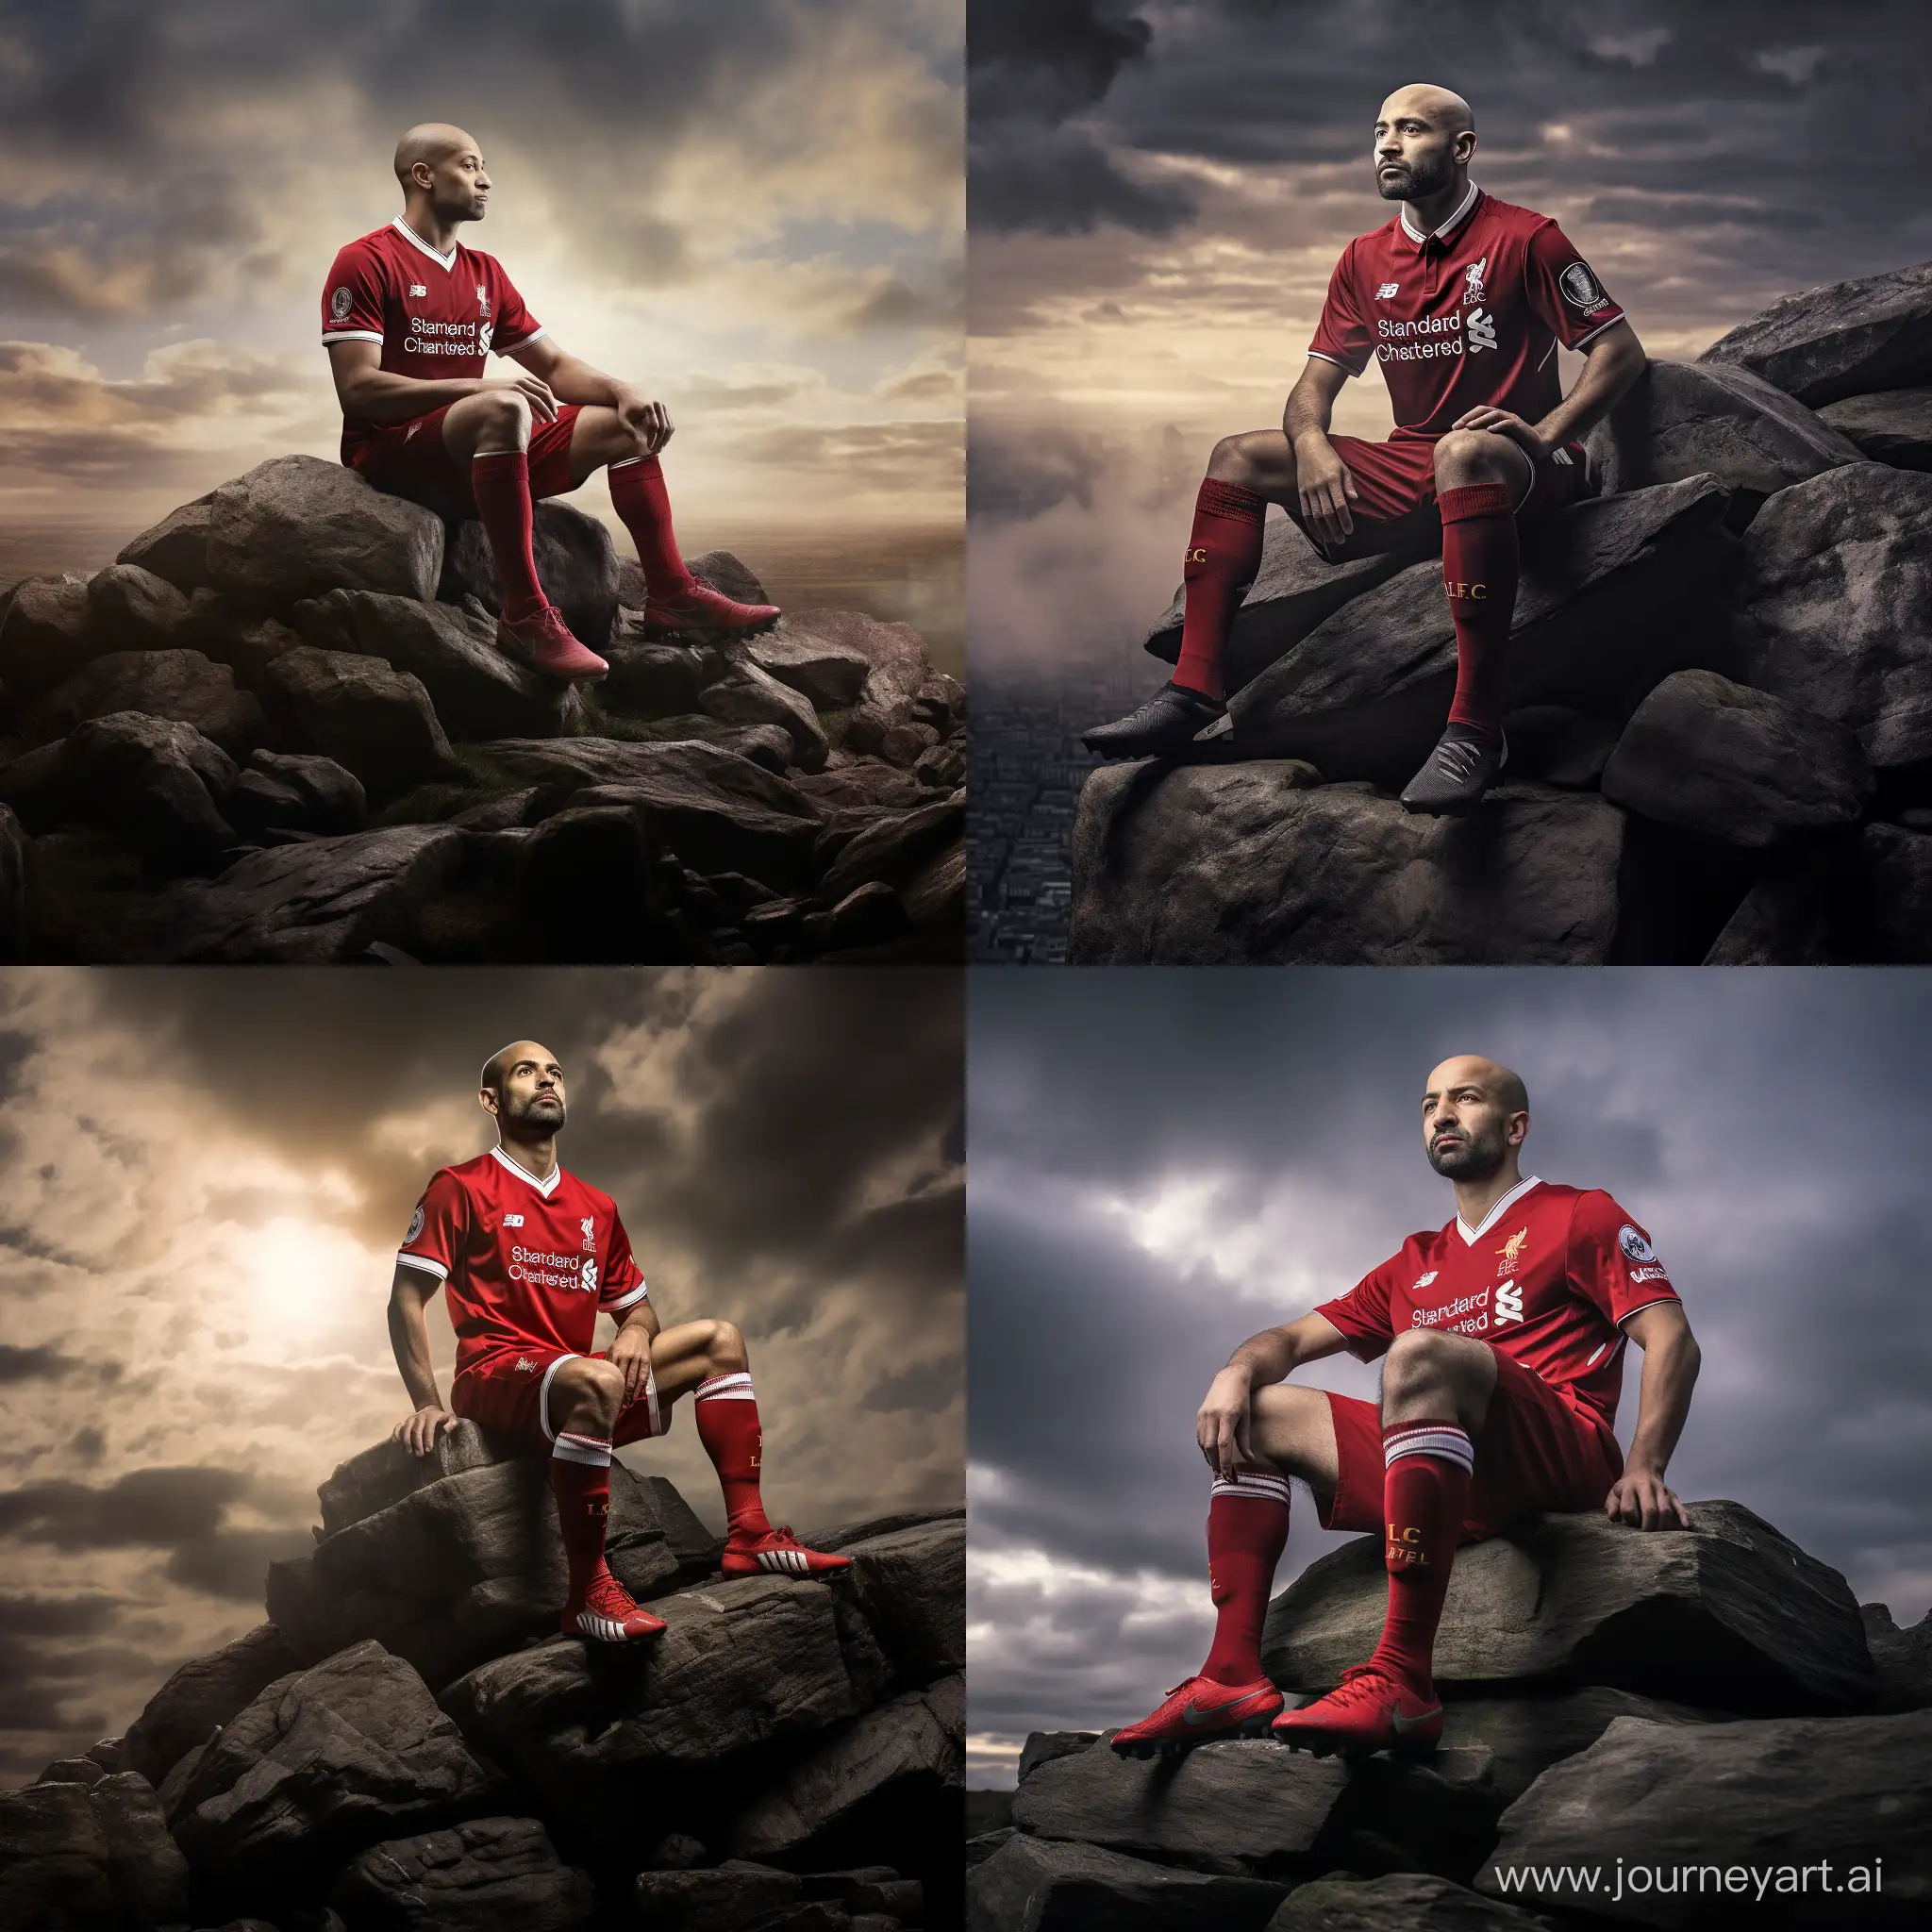 Muhammed-Salah-Majestic-Liverpool-FC-King-atop-Rugged-Rock-Formation